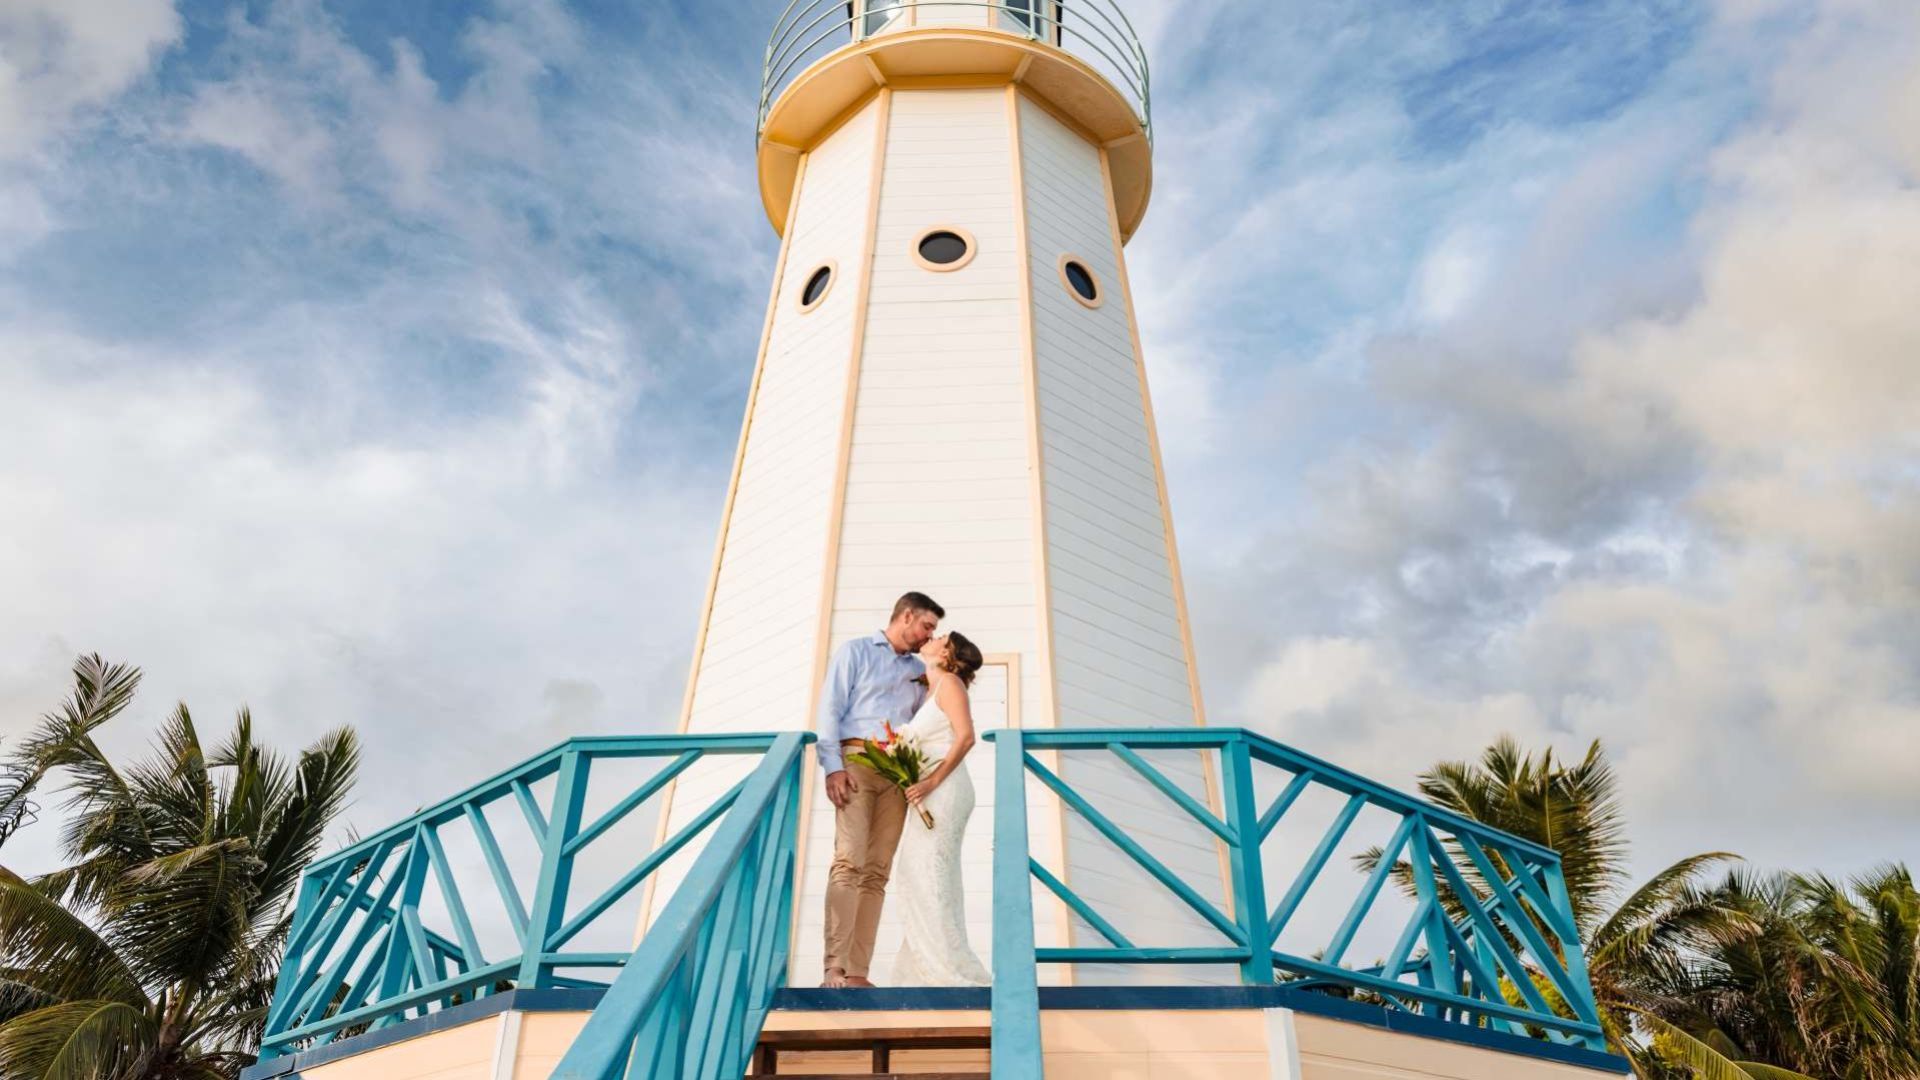 A Man And Woman Kissing On A Balcony With A Lighthouse In The Background